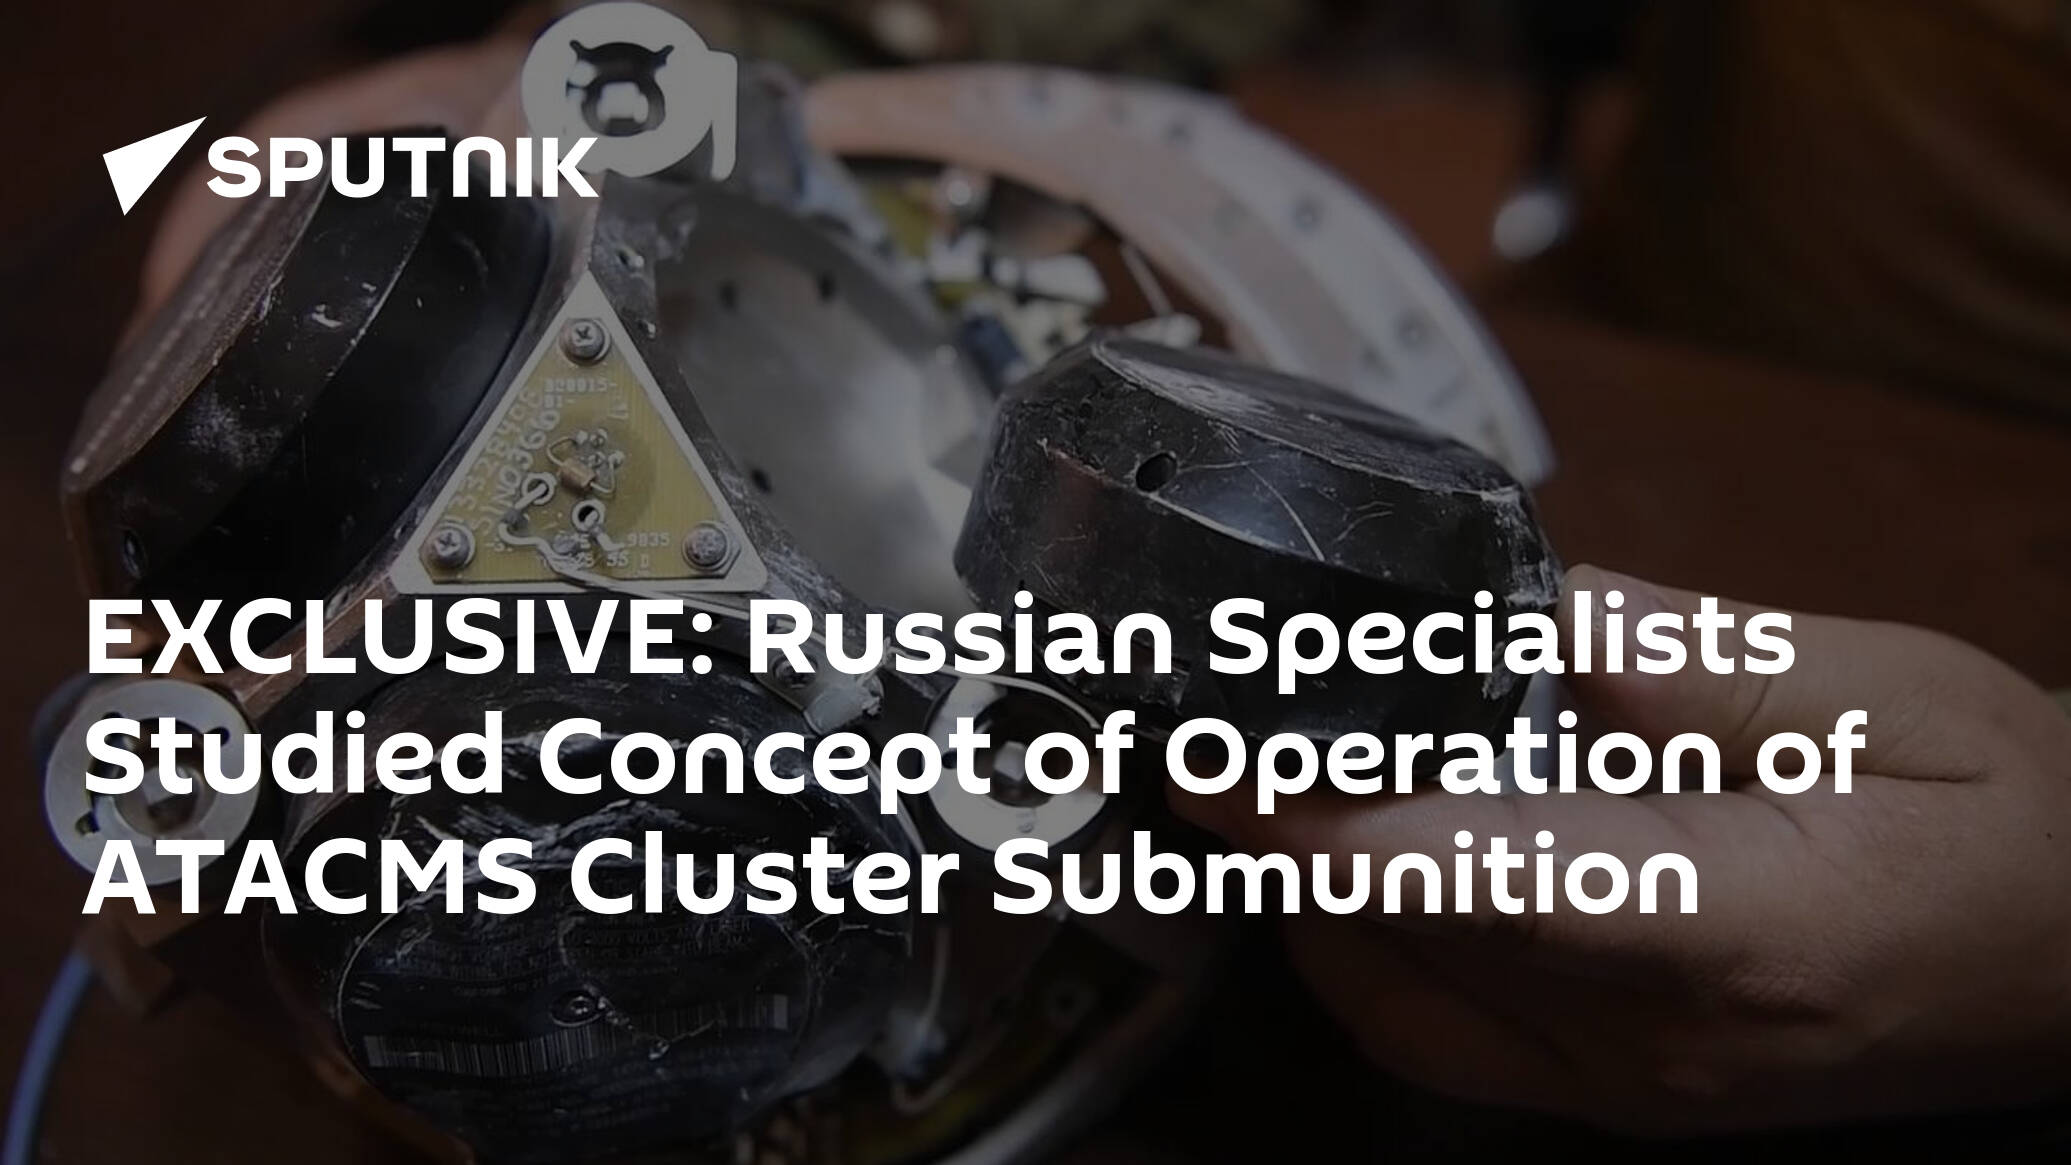 EXCLUSIVE: Russian Specialists Studied Concept of Operation of ATACMS Cluster Submunition